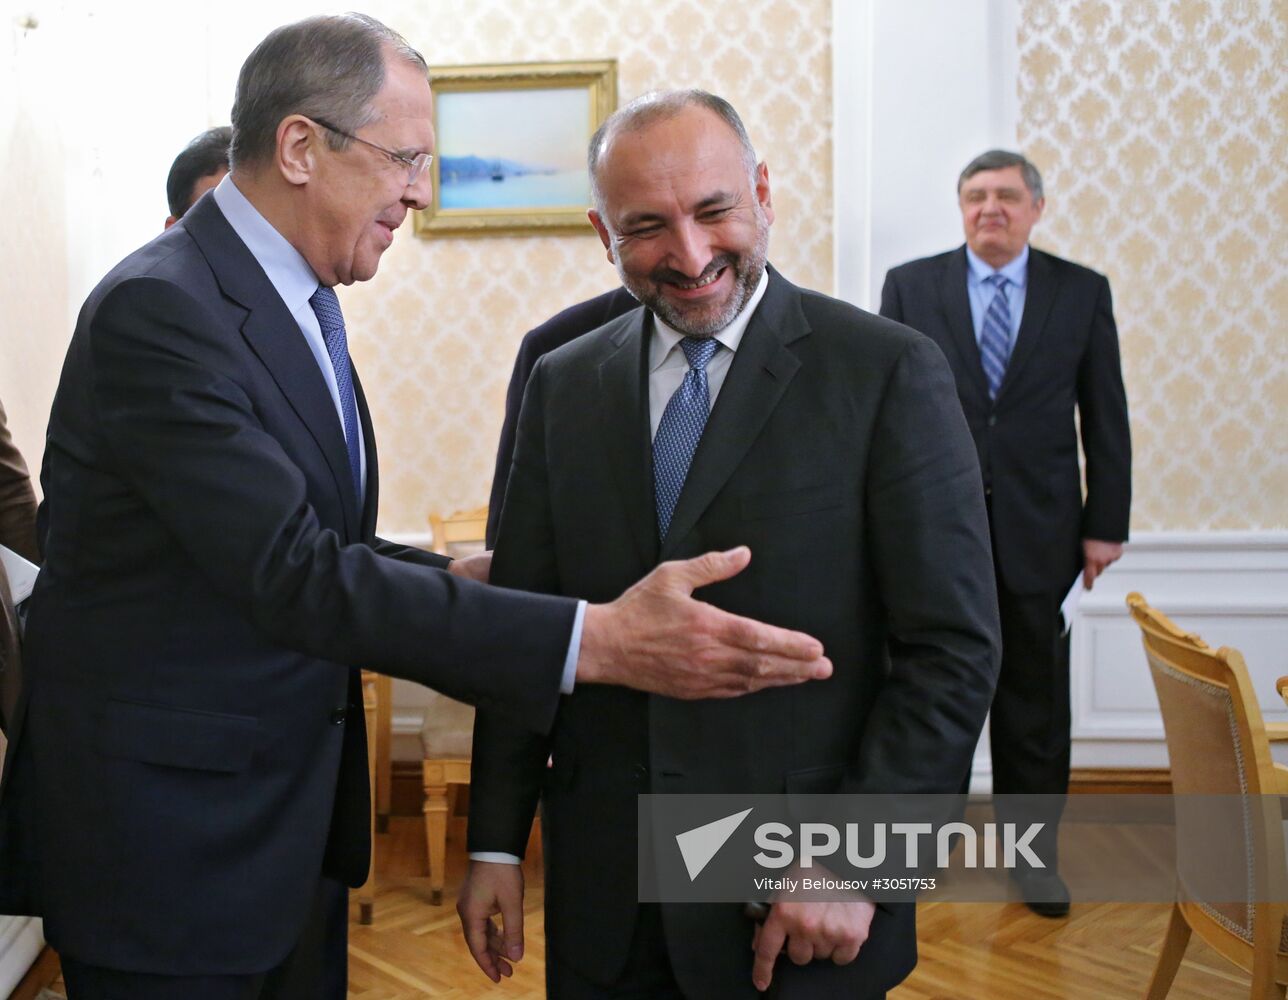 Russian Foreign Minister Lavrov meets with Afghanistan President's security advisor Hanif Atmar